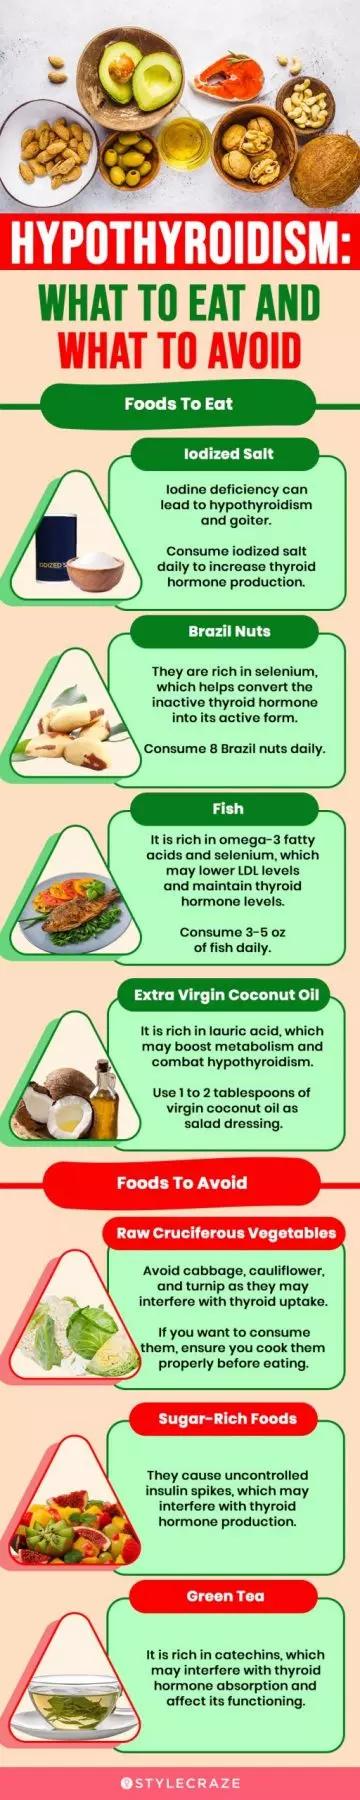 hypothyroidism what to eat and what to avoid (infographic)